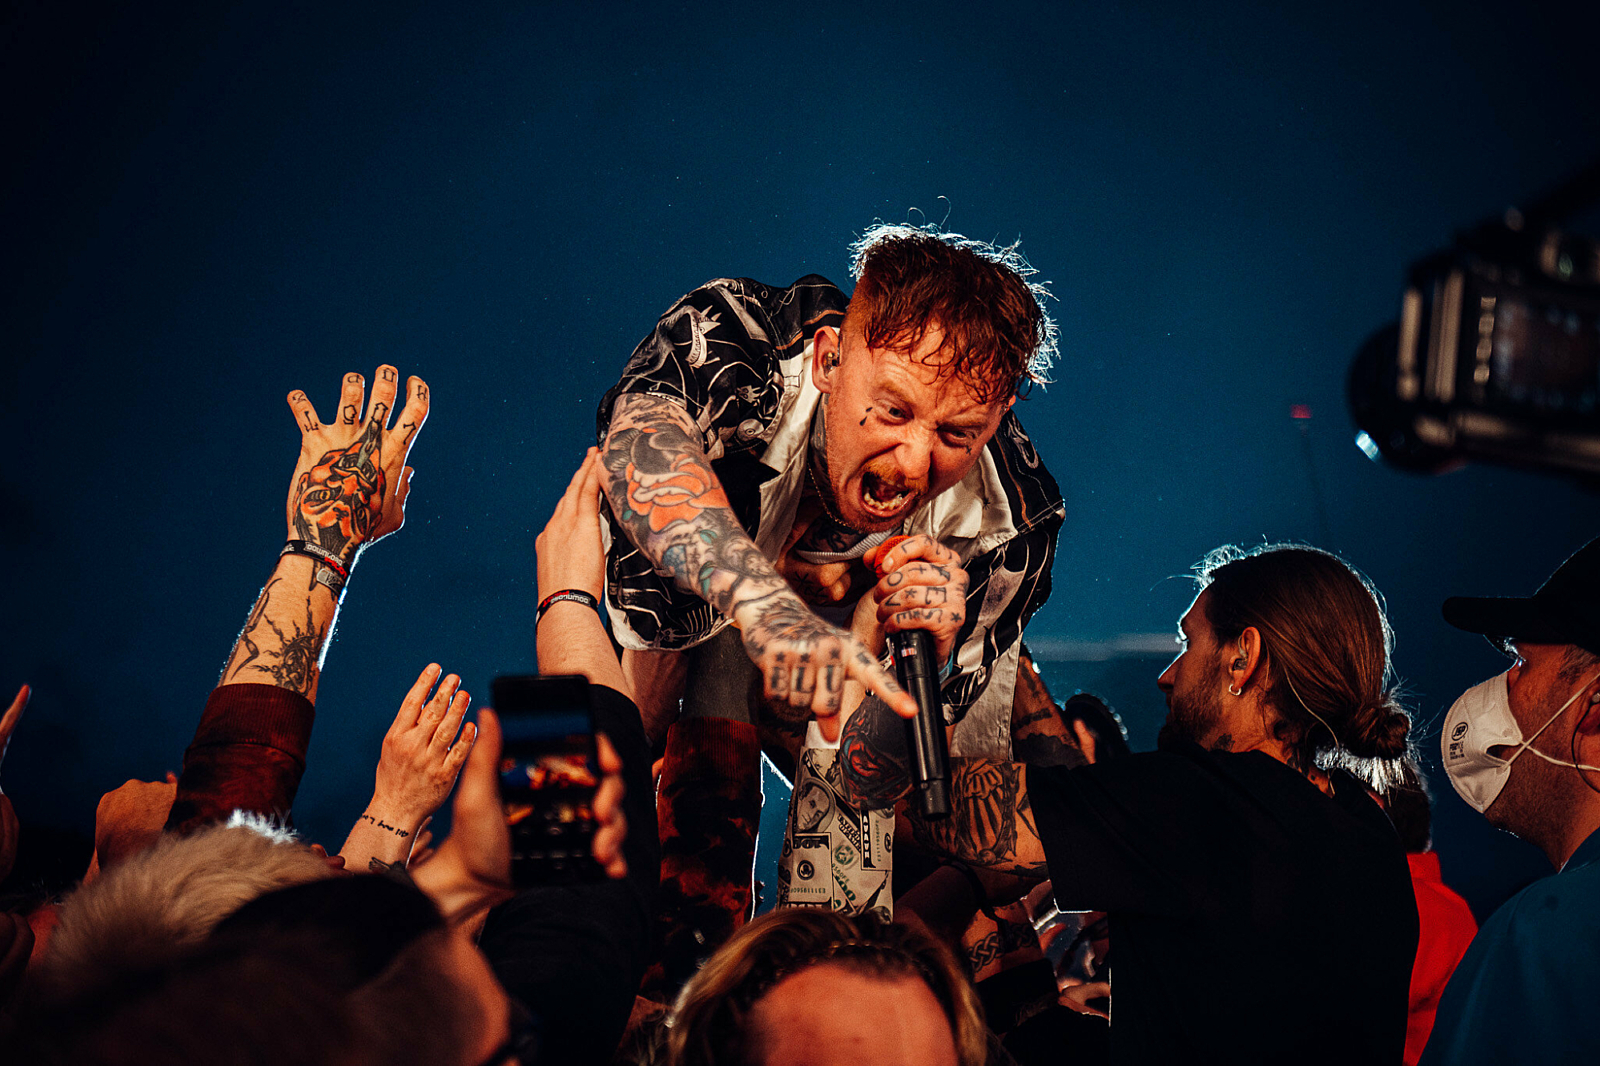 Frank Carter & The Rattlesnakes: "My Mum has been on stage at Reading & Leeds more times than most bands"